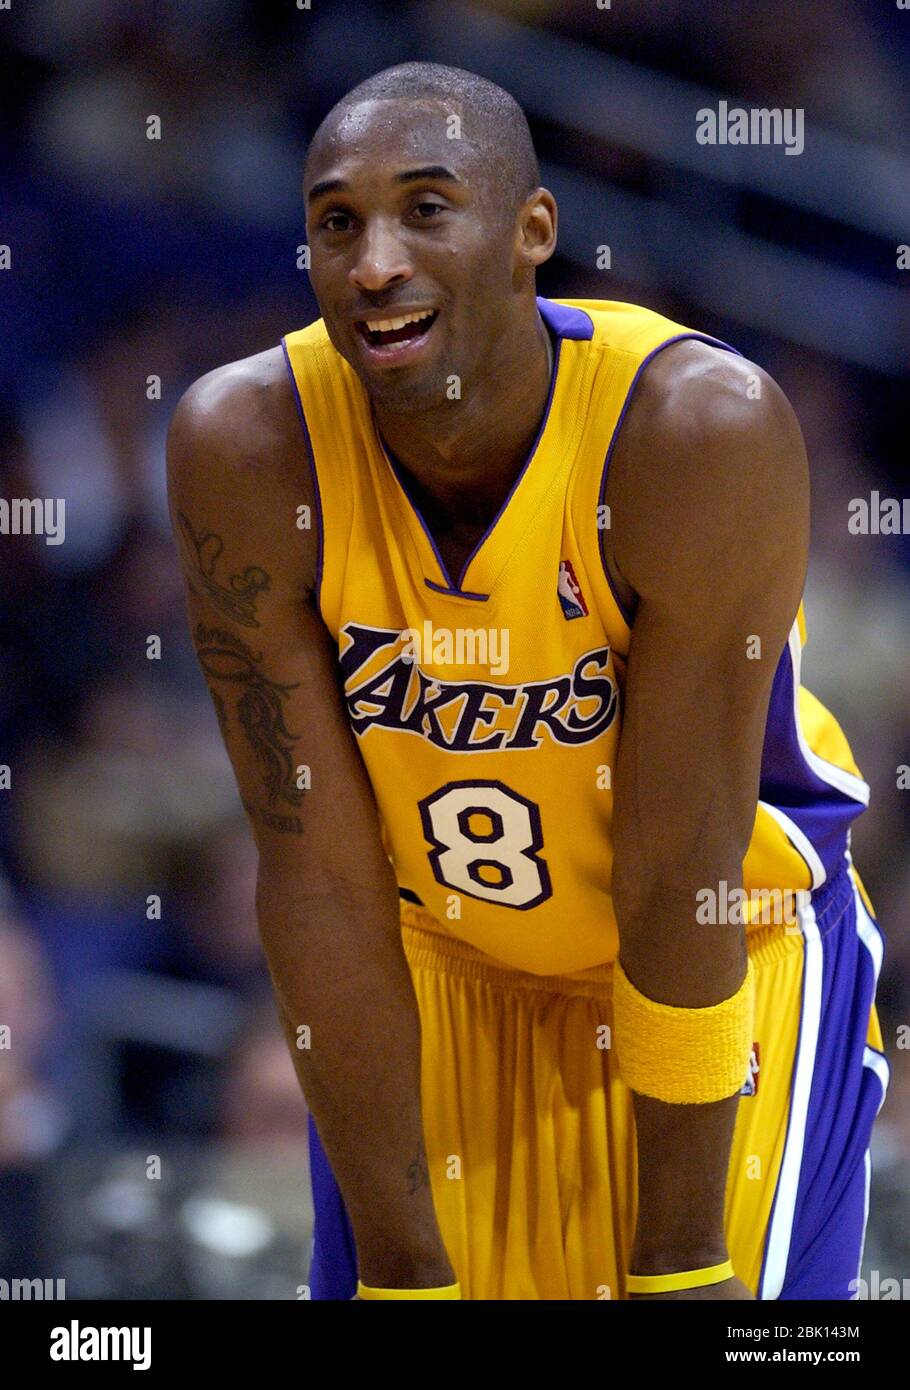 Los Angeles, United States. 09th Dec, 2003. Los Angeles Lakers